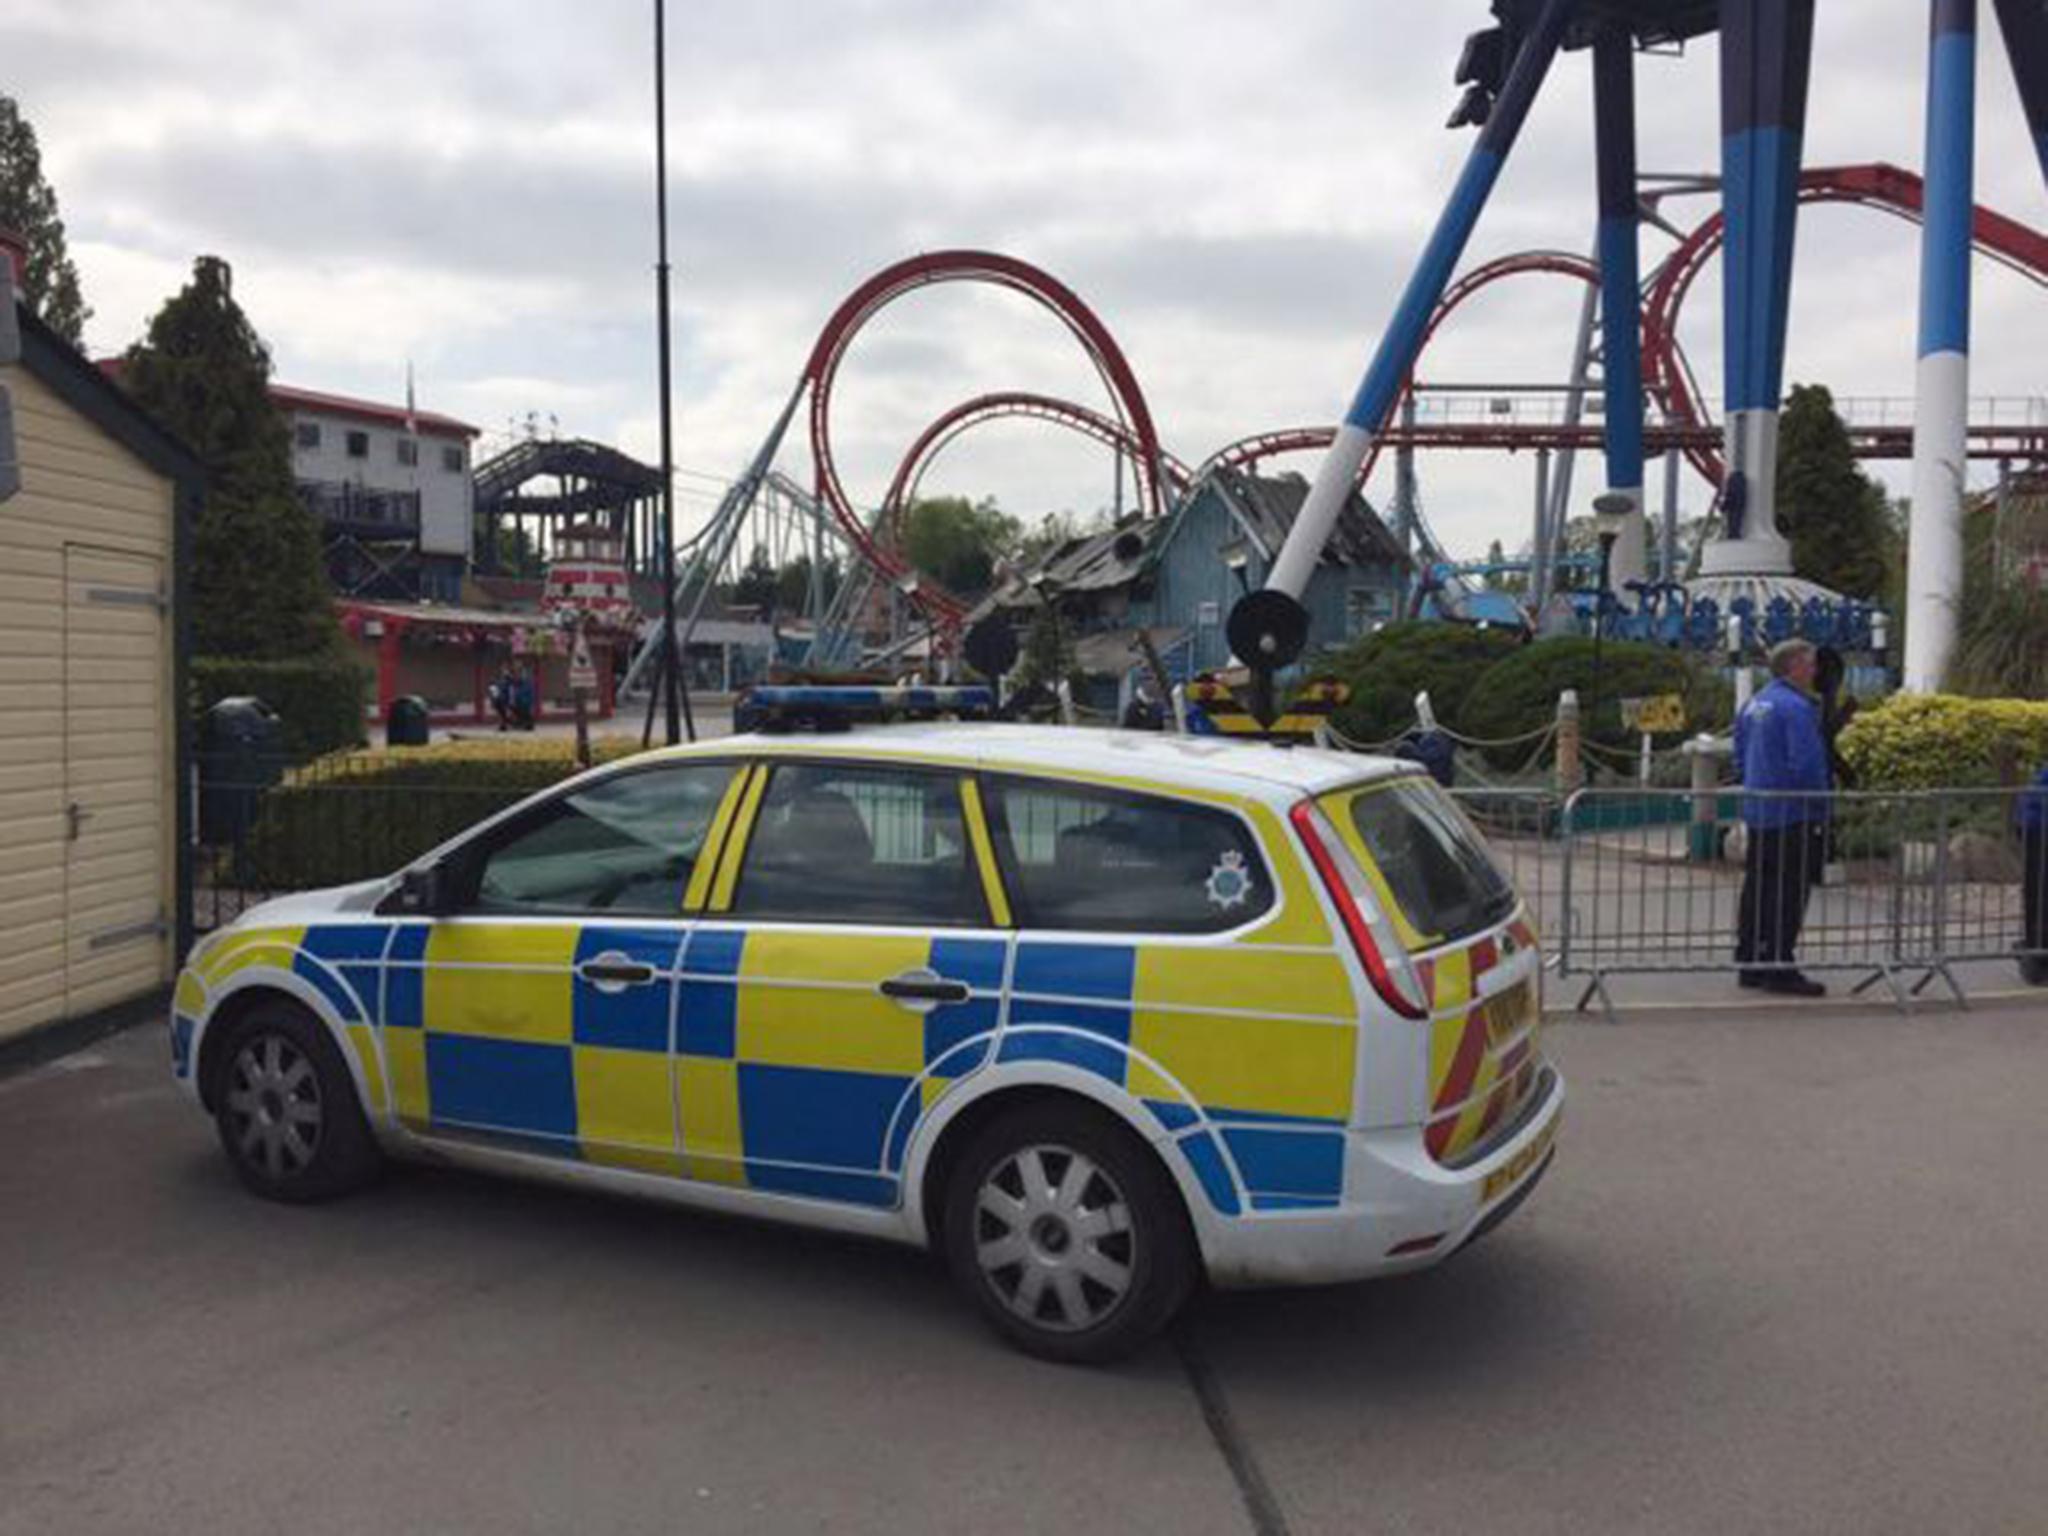 Police vehicle at Drayton Manor Theme Park responding to the accident